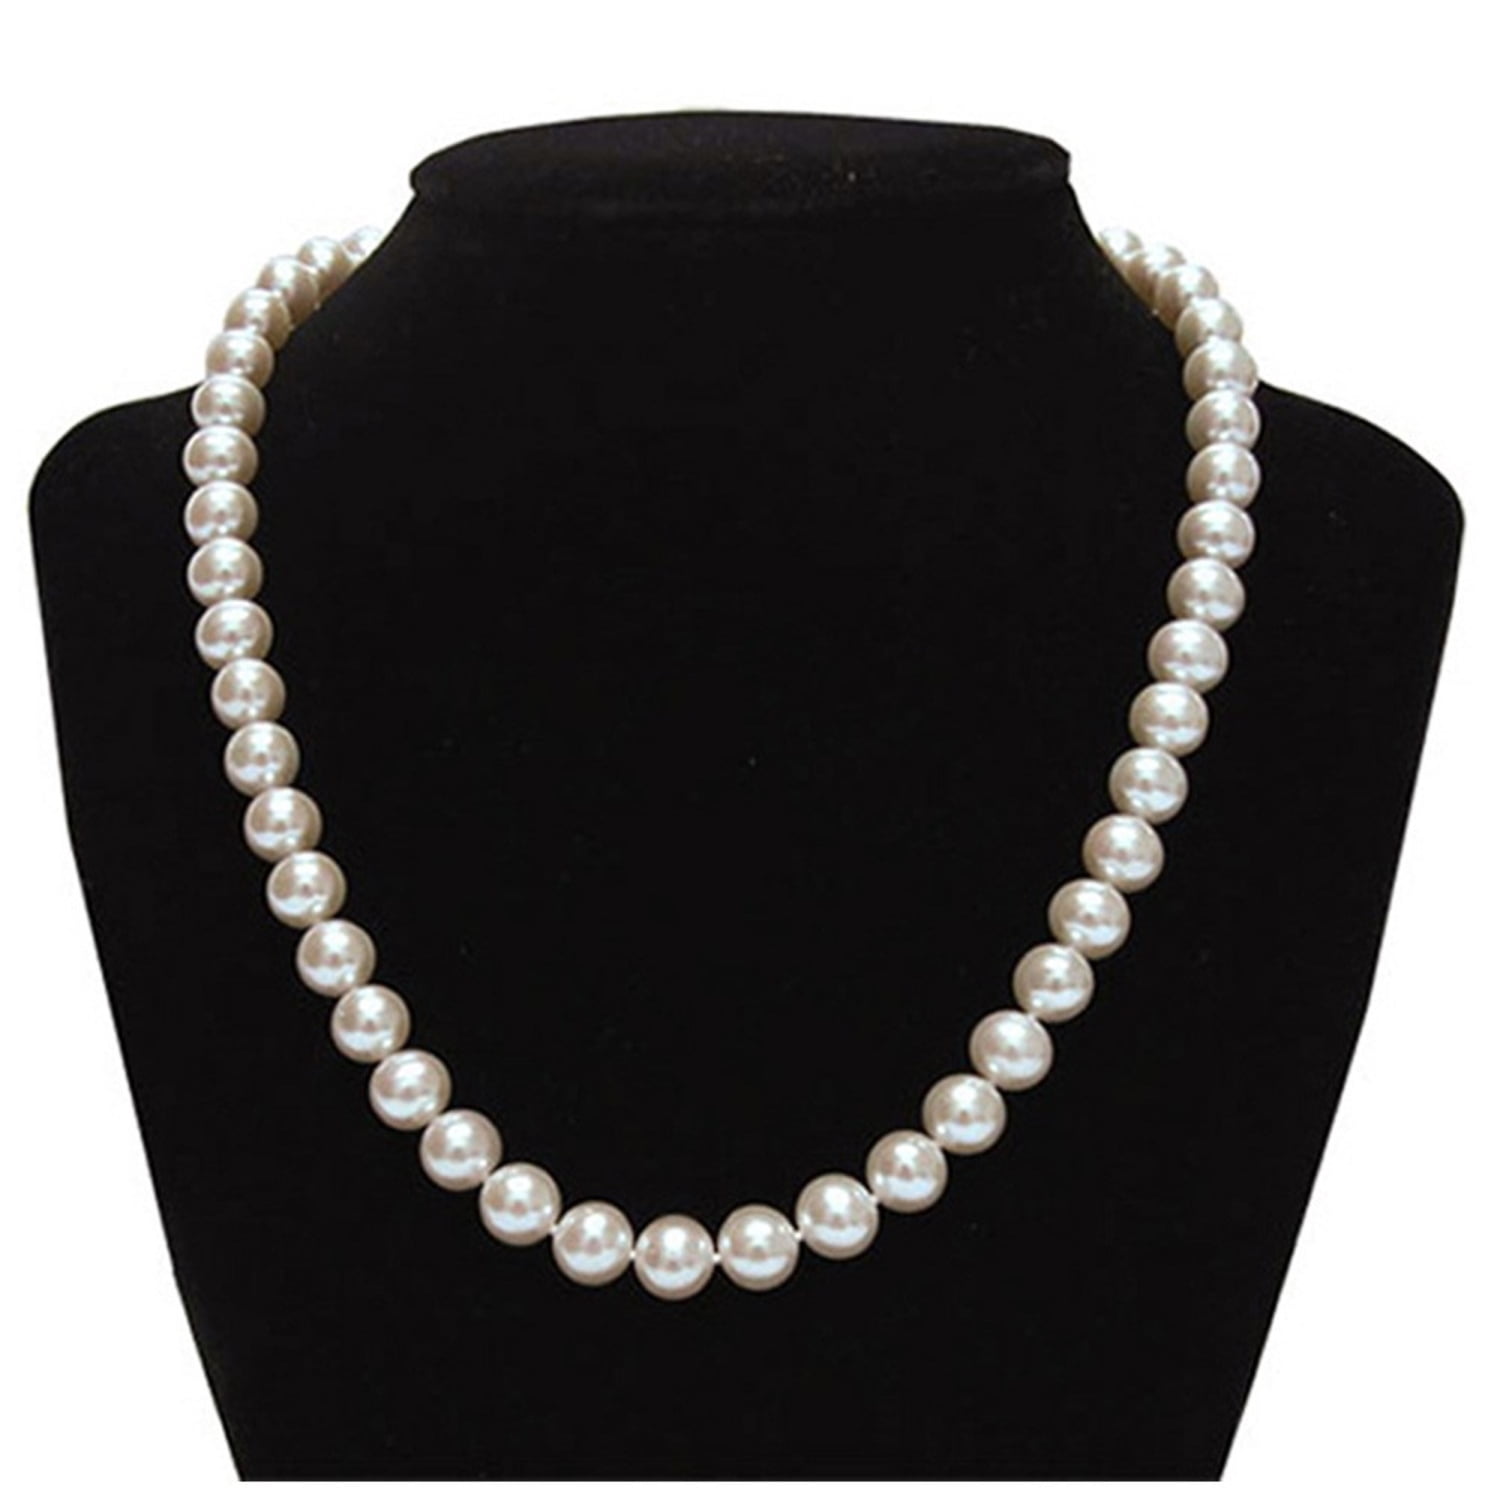 Cultured Pearl Necklace Sterling Silver Clearance, 52% OFF 